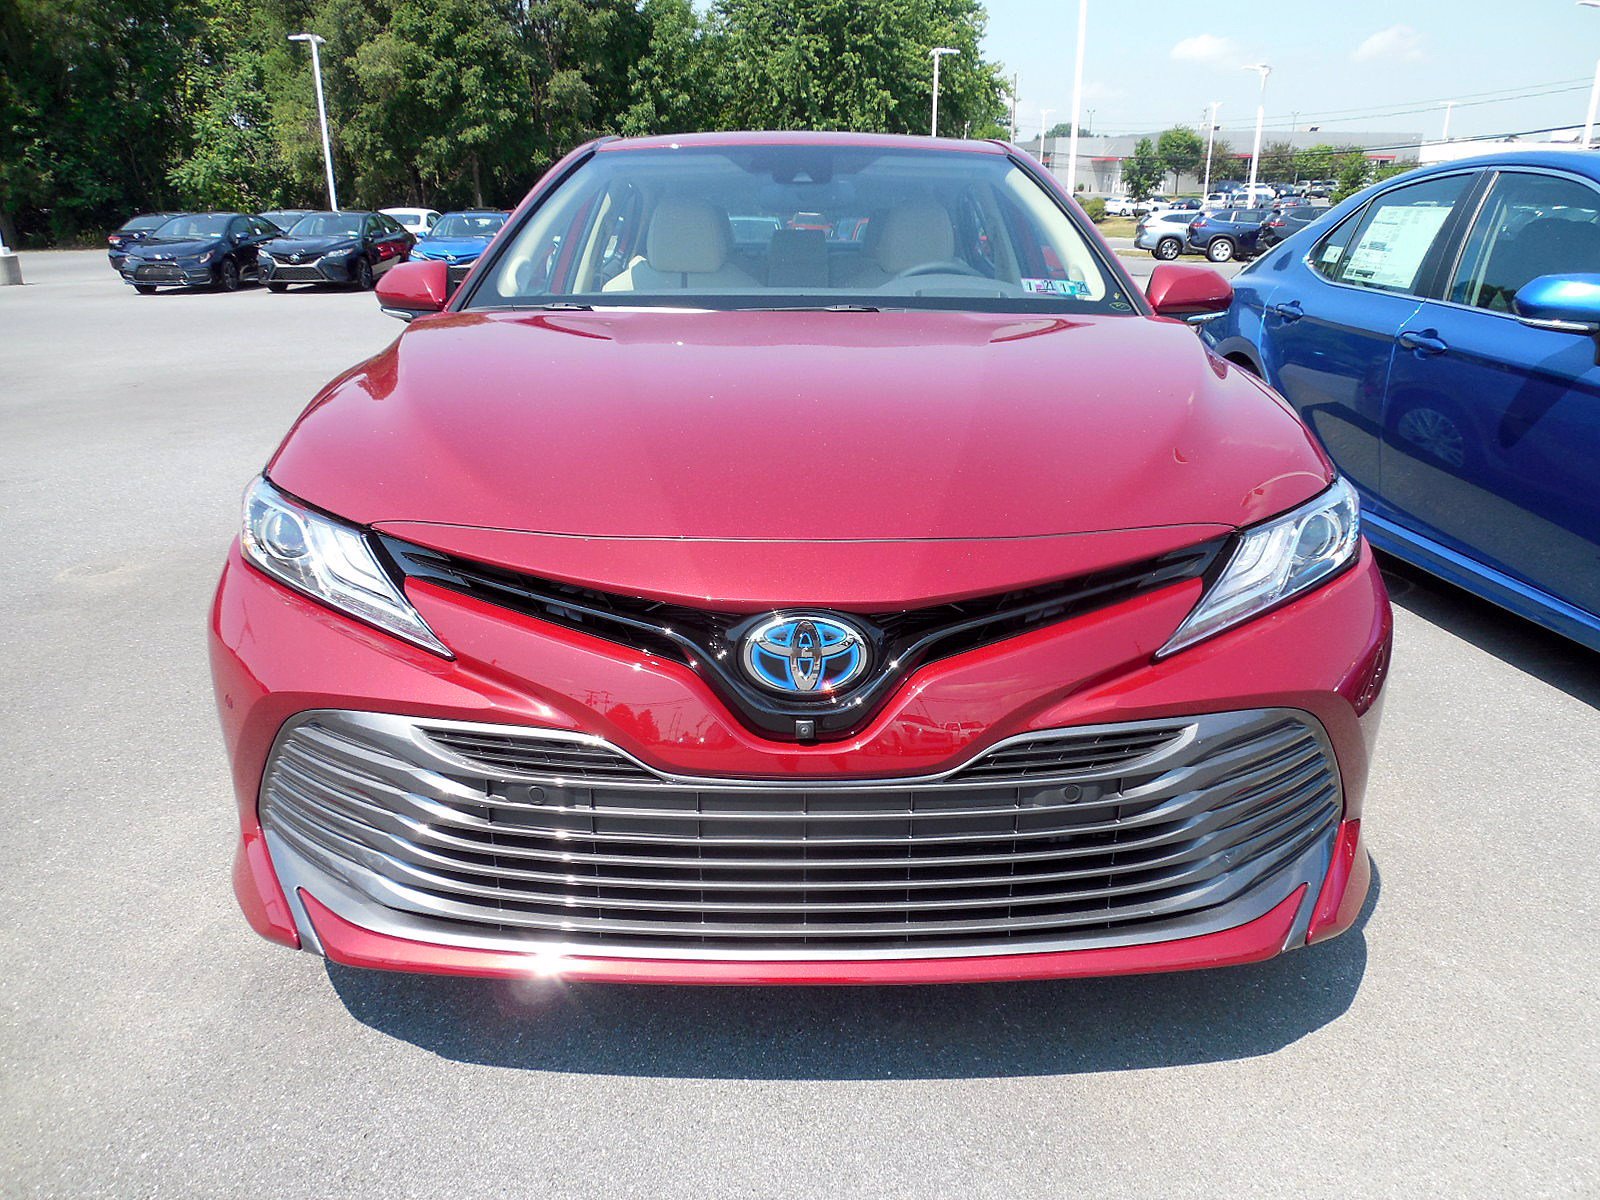 New 2020 Toyota Camry Hybrid XLE 4dr Car in East Petersburg #15174 ...
